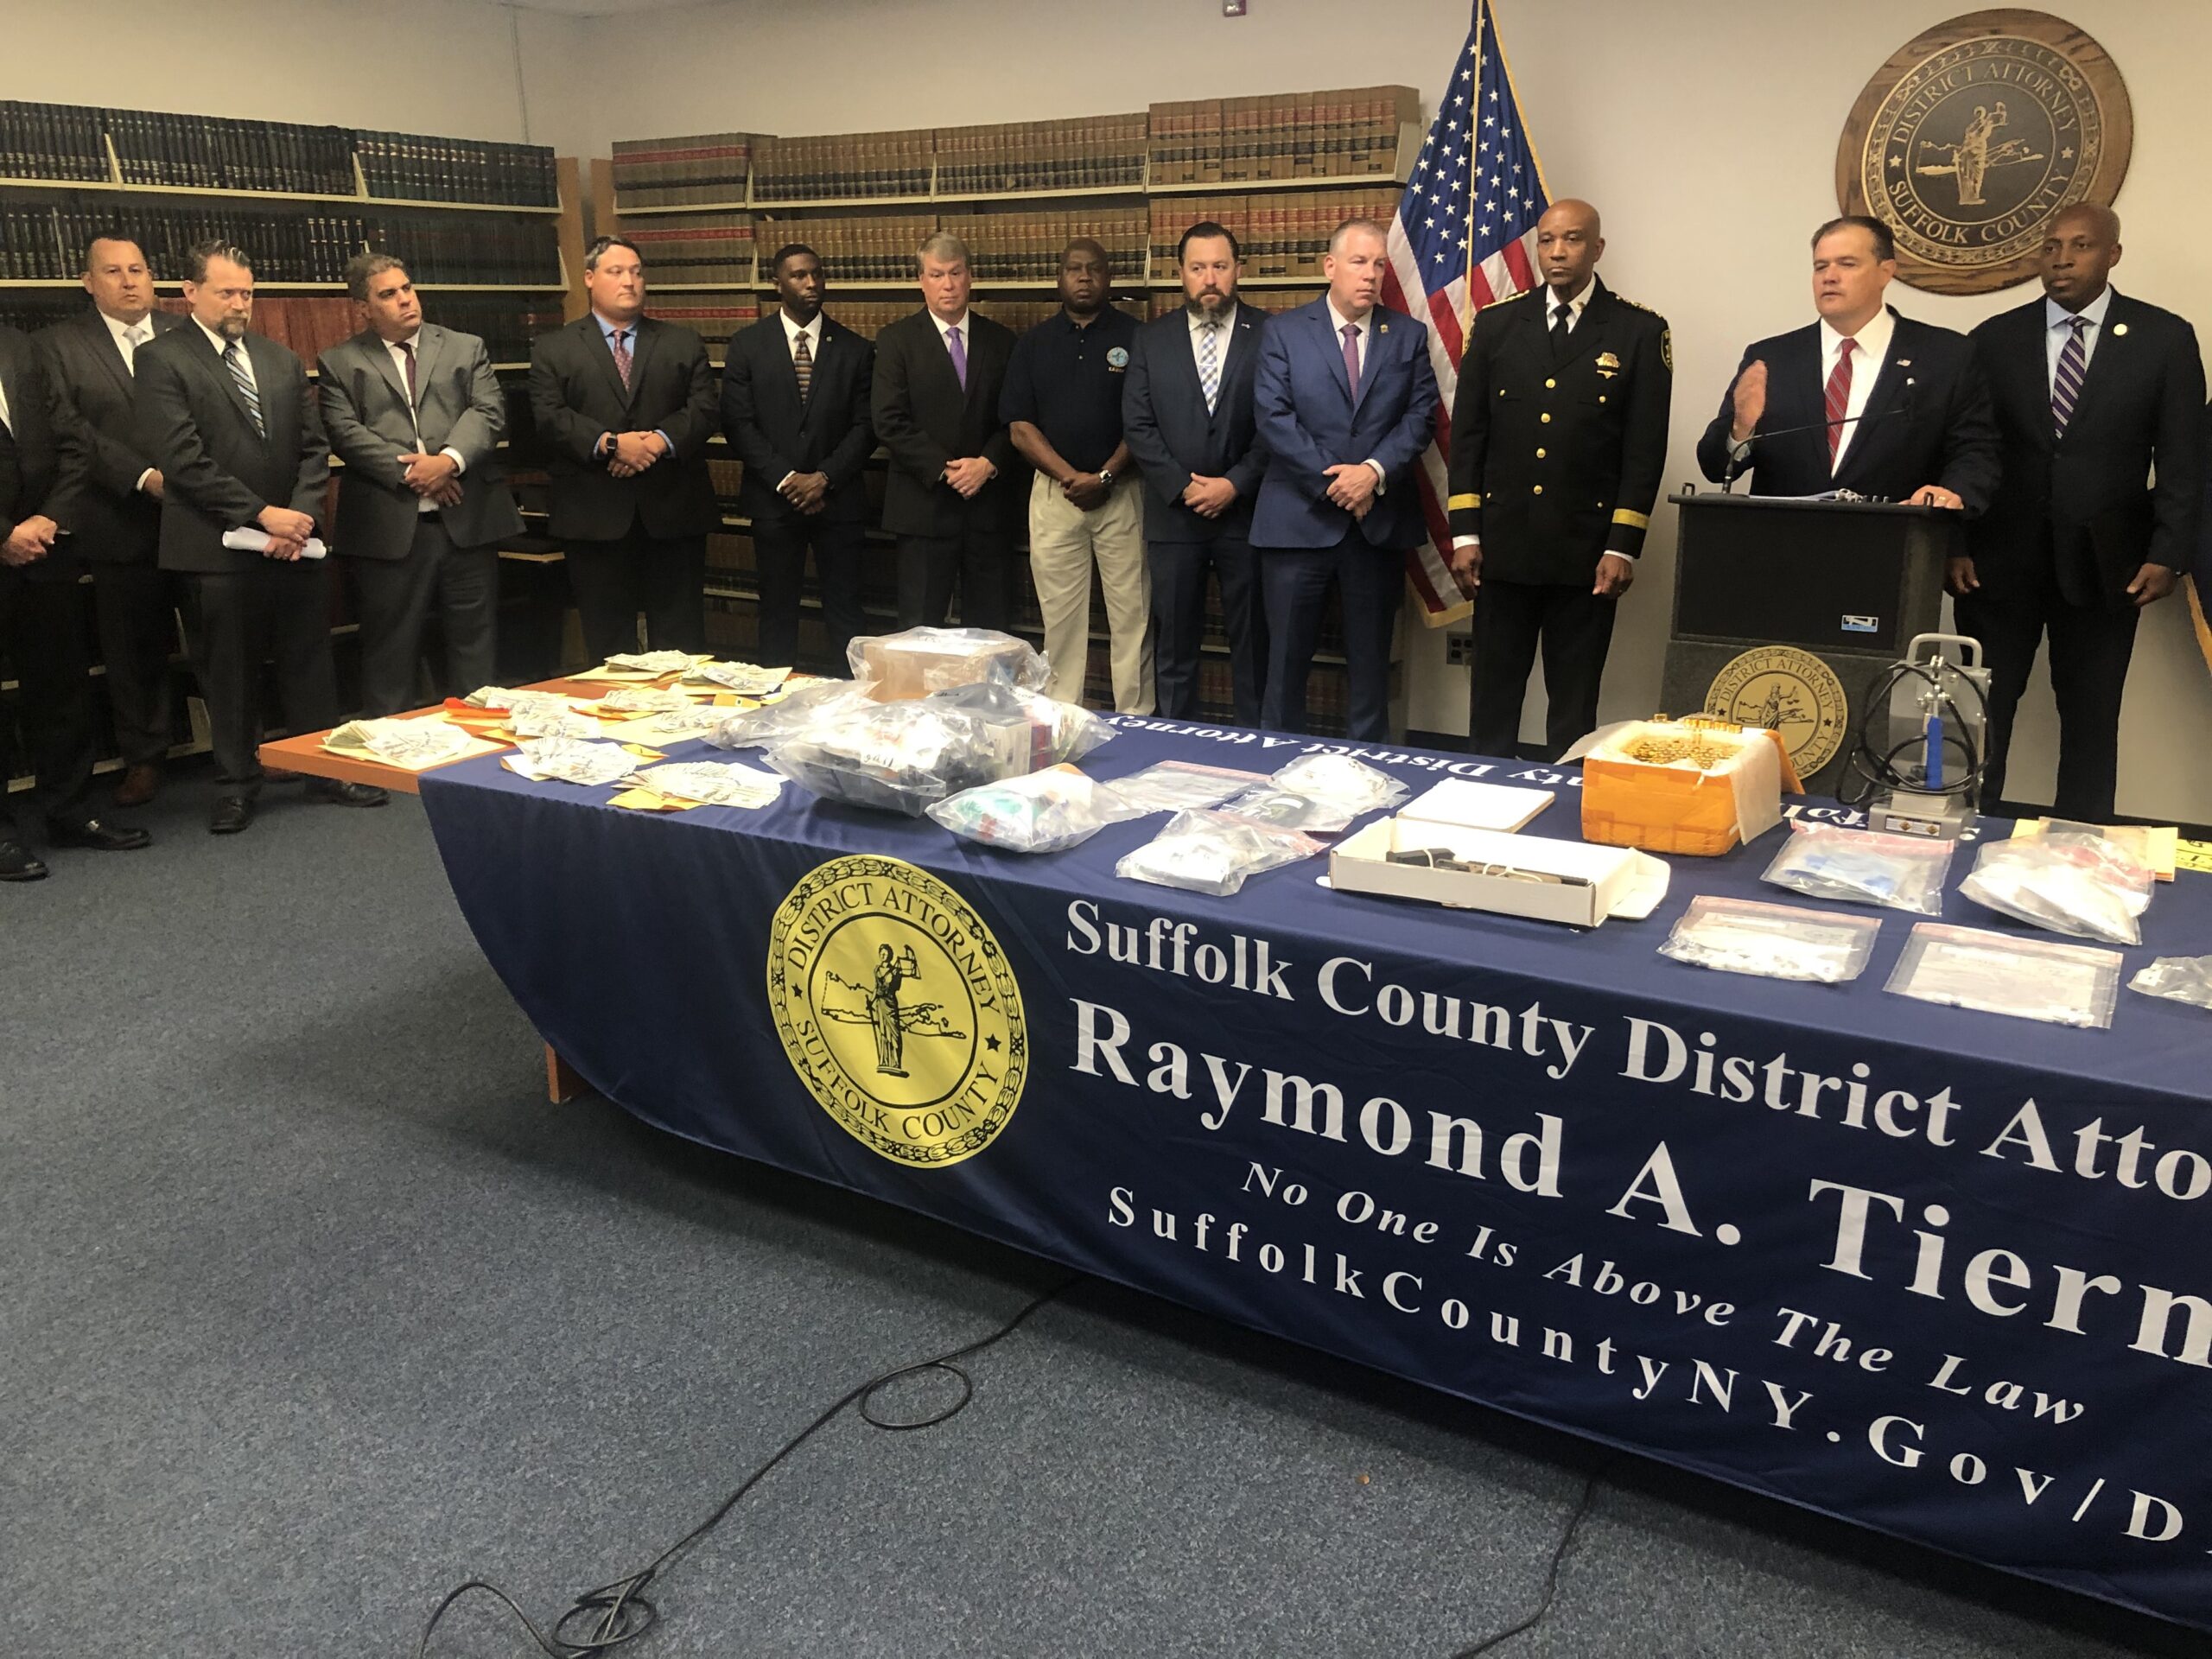 Suffolk County District Attorney Ray Tierney held a press conference on October 7 regarding the four suspects who were charged with selling cocaine and fentanyl in Montauk.  T.E. MCMORROW